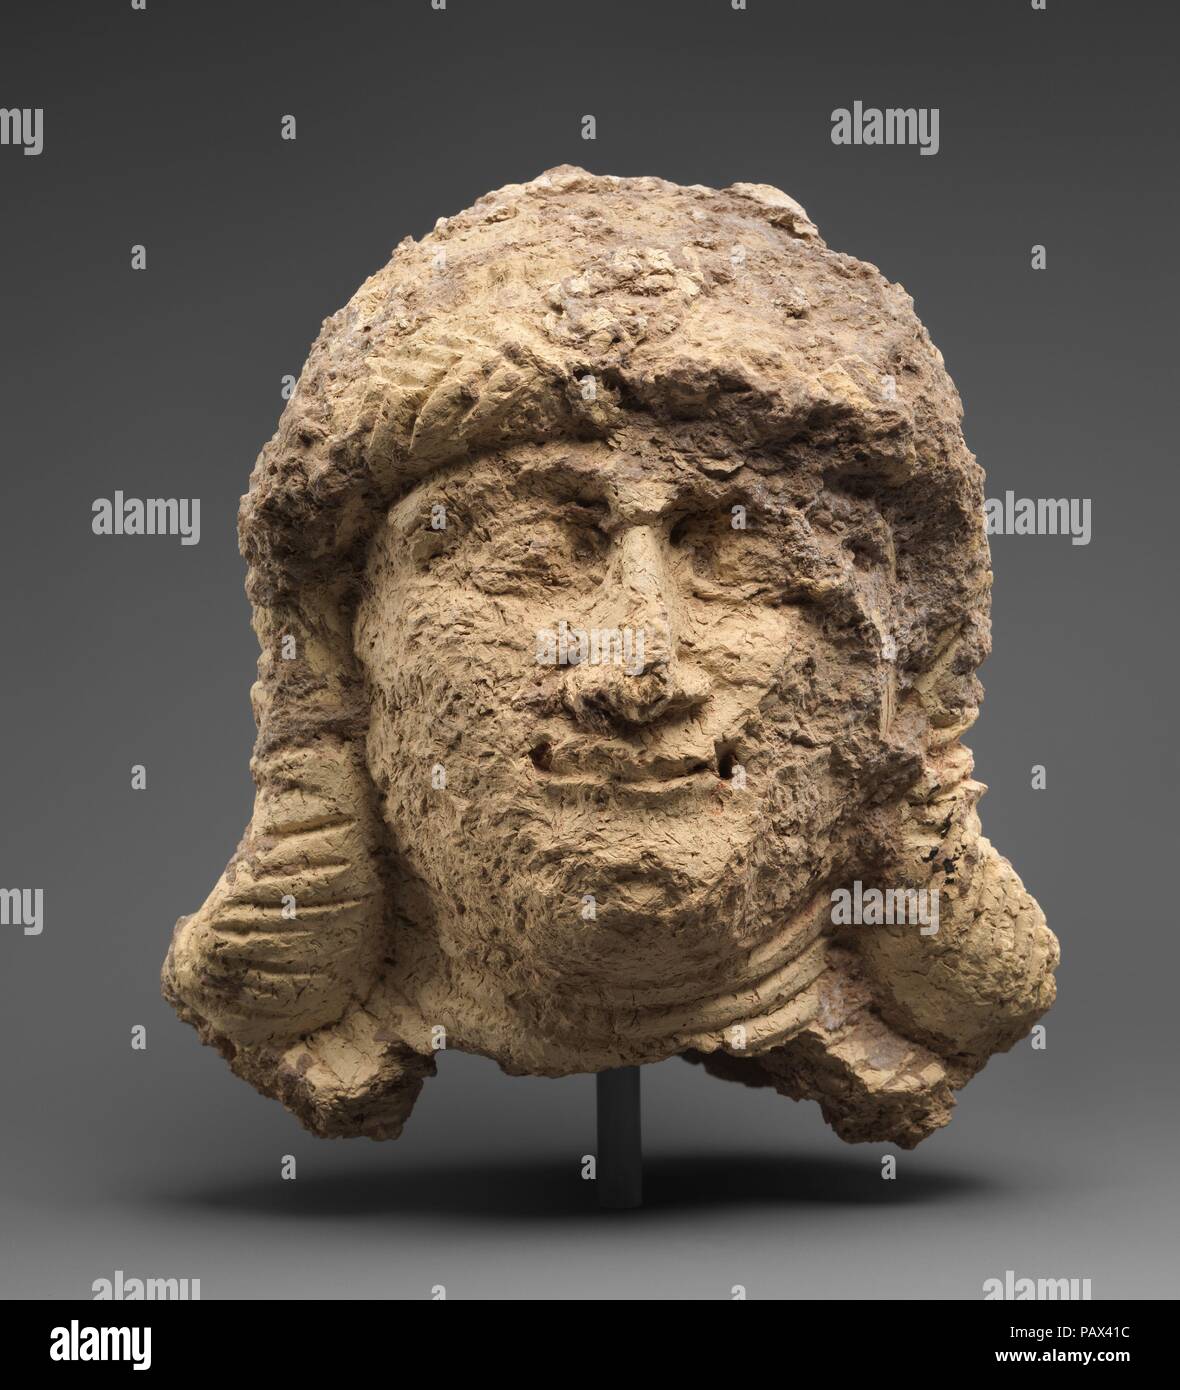 Head of a female. Culture: Babylonian. Dimensions: 7 1/8 x 5 in. (18 x 12.7 cm). Date: ca. 2000-1600 B.C..  This head, broken at the neck and hollow on the inside, depicts a female figure with shoulder length hair arranged in bands of braids around her head and alongside her face. She has large eyes, a small thin smile, and large ears protrude from her hair. Seven bands around her neck represent a multi-strand necklace. The head appears to have been hand-formed out of wads of clay, then fired and painted. The quality of the clay - tempered with organic matter - may account, in part, for its po Stock Photo